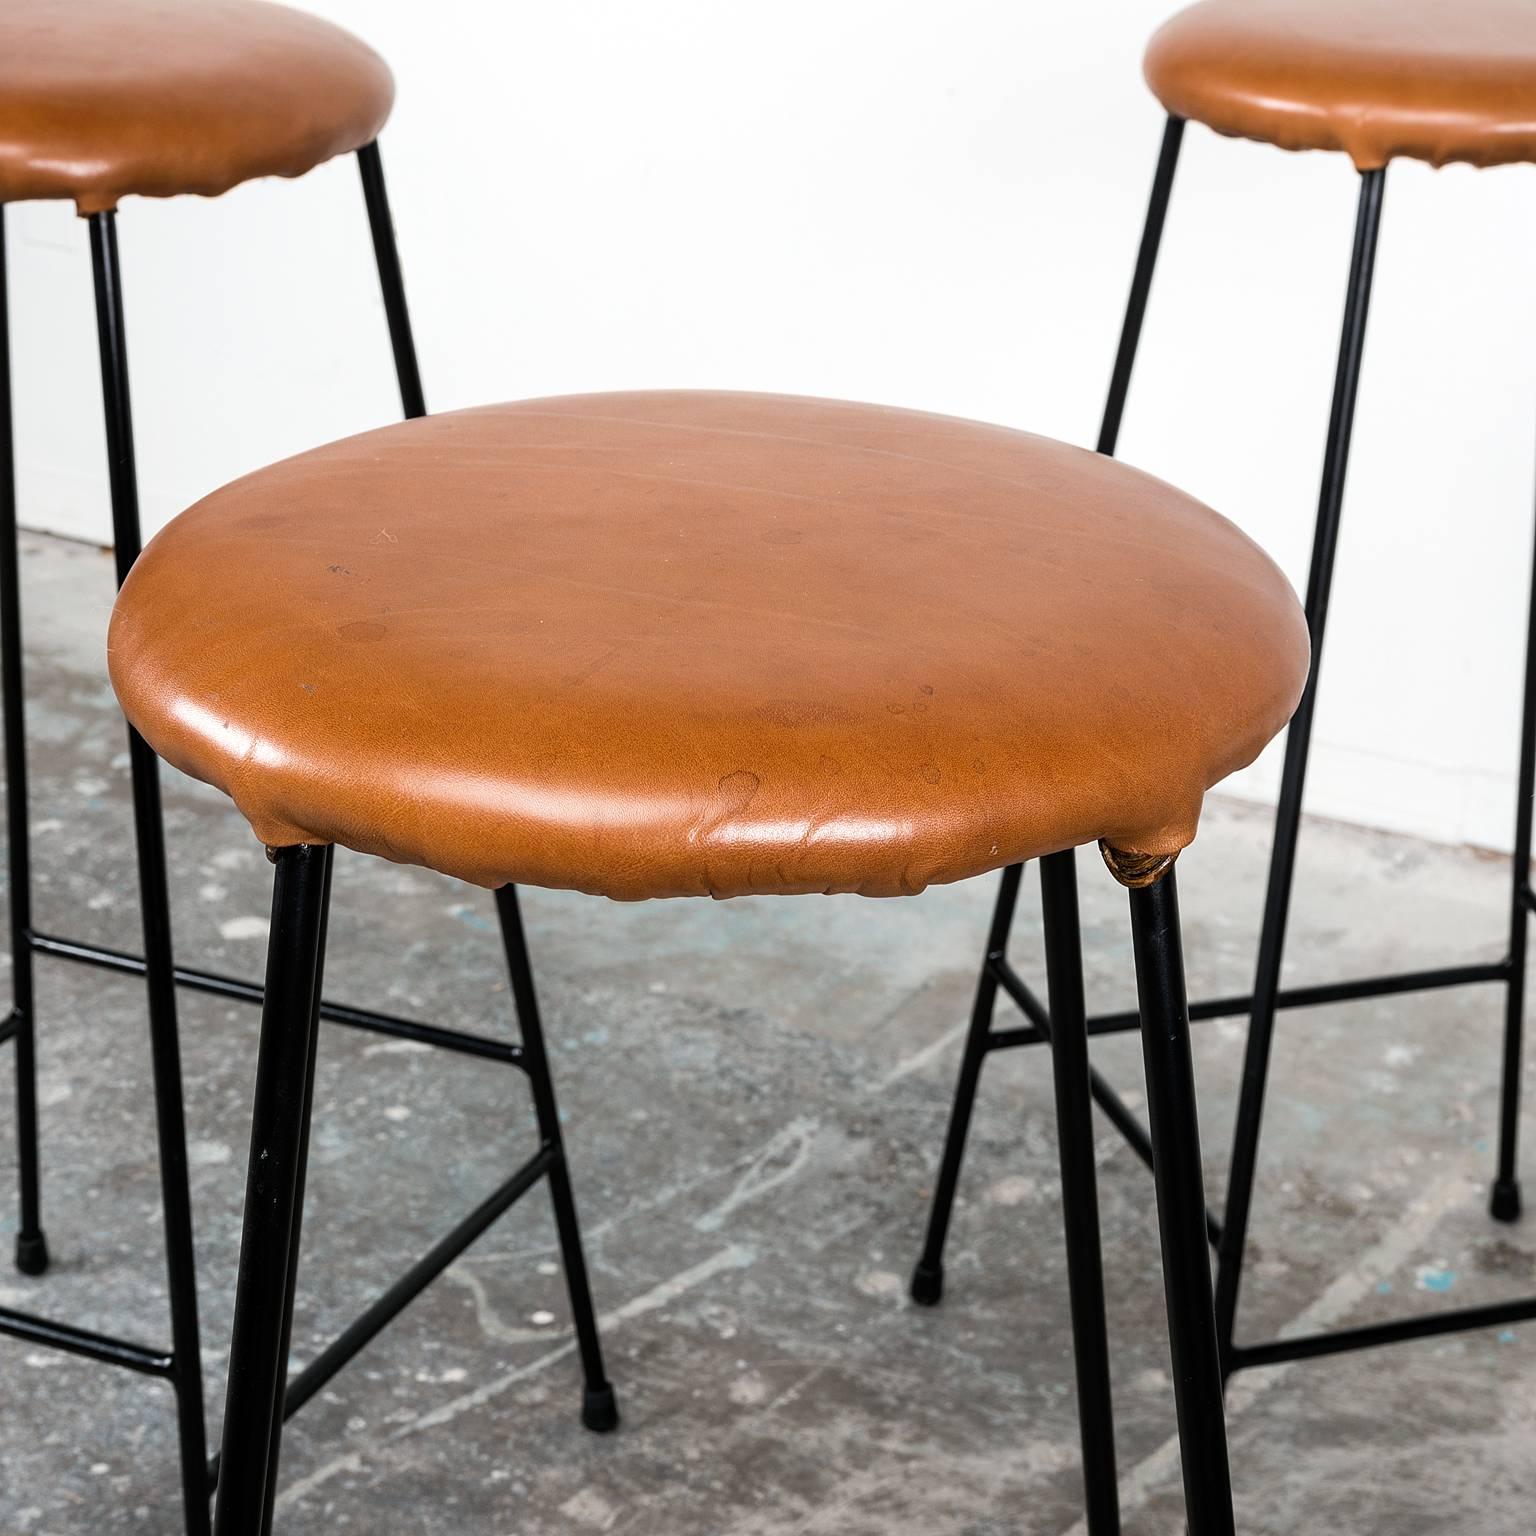 American Set of Four Iron Barstools with Caramel Leather Seats, 1960s